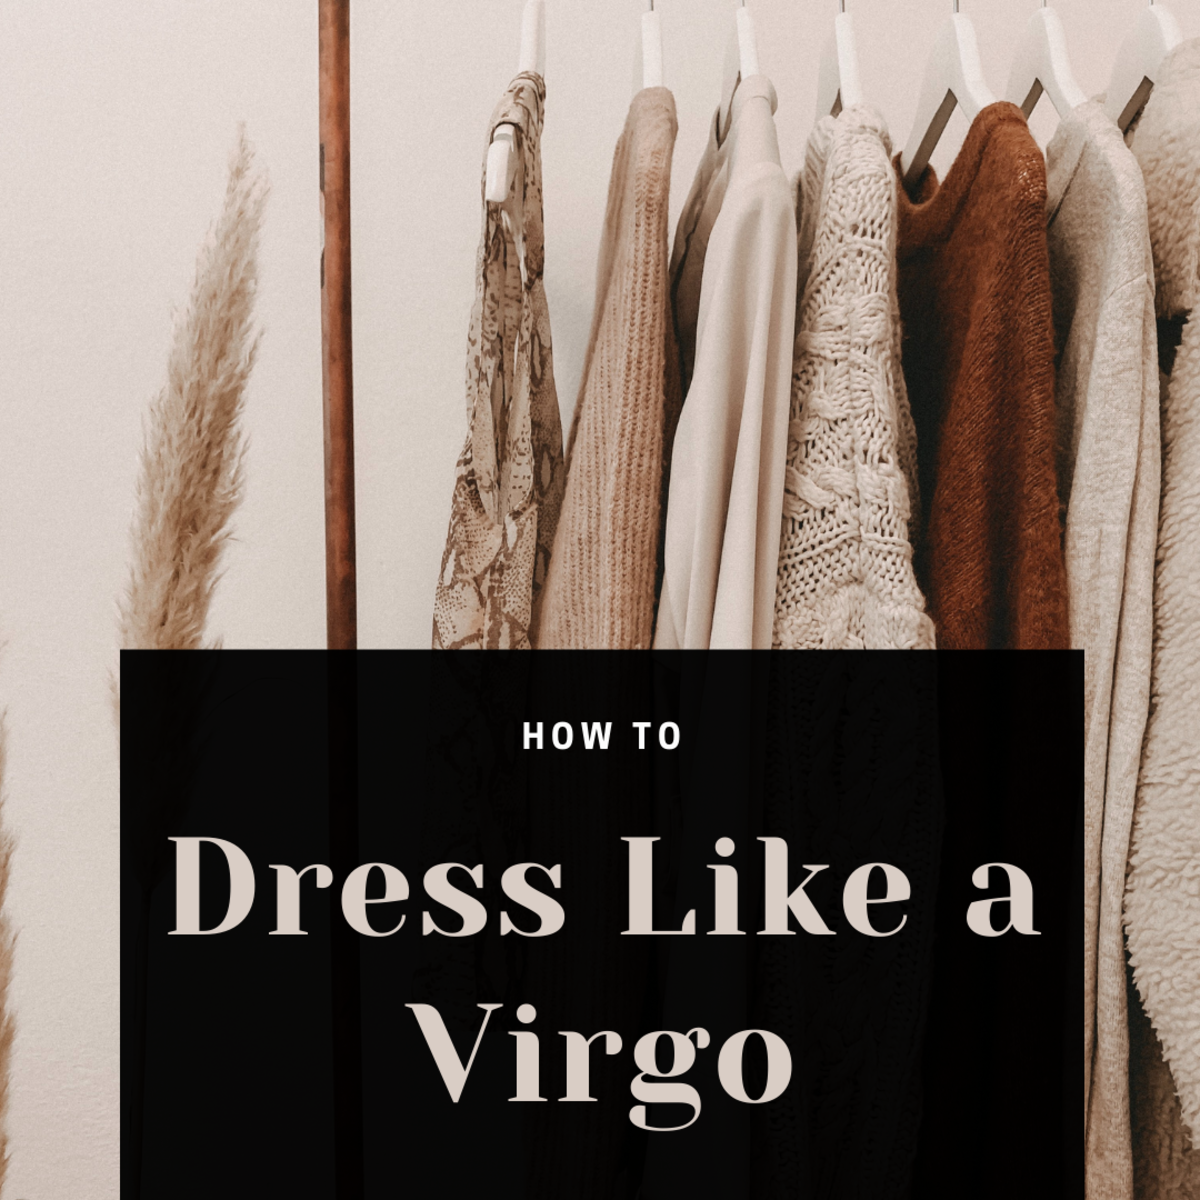 Virgo wears clothes that are serious, elegant, and minimalistic. To get the right Virgo vibe, wear clothes in brown, white, black, and gray.